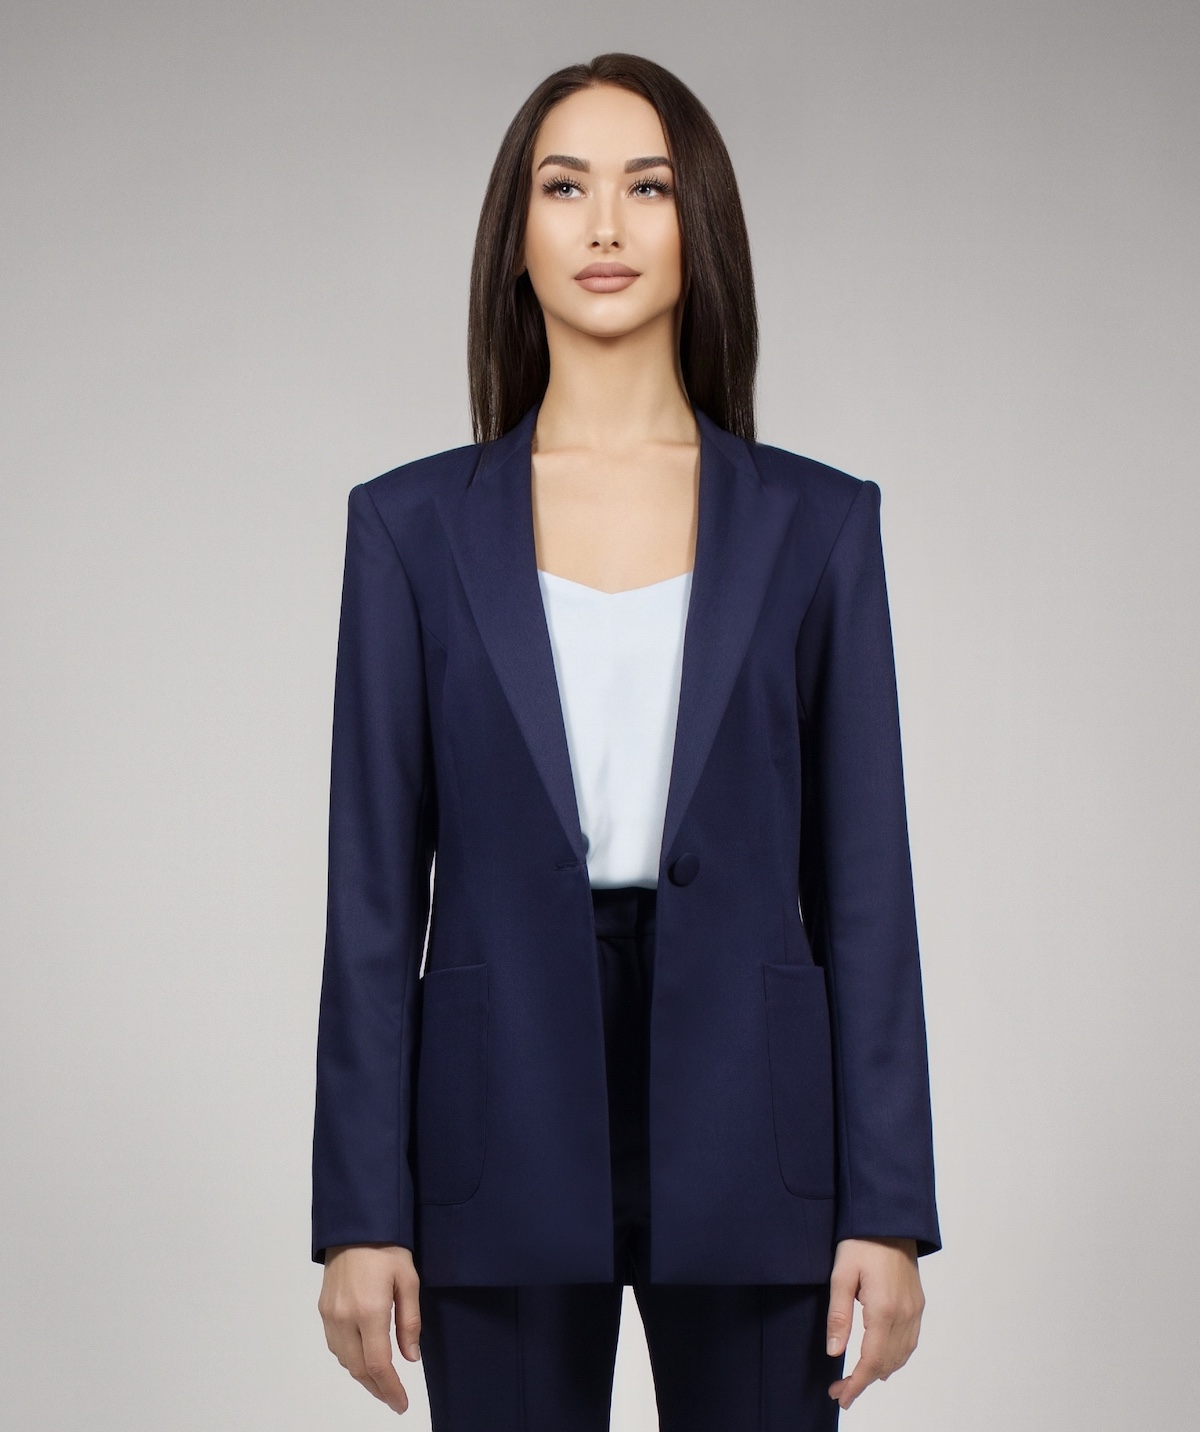 Classic Navy Blazer | Collection